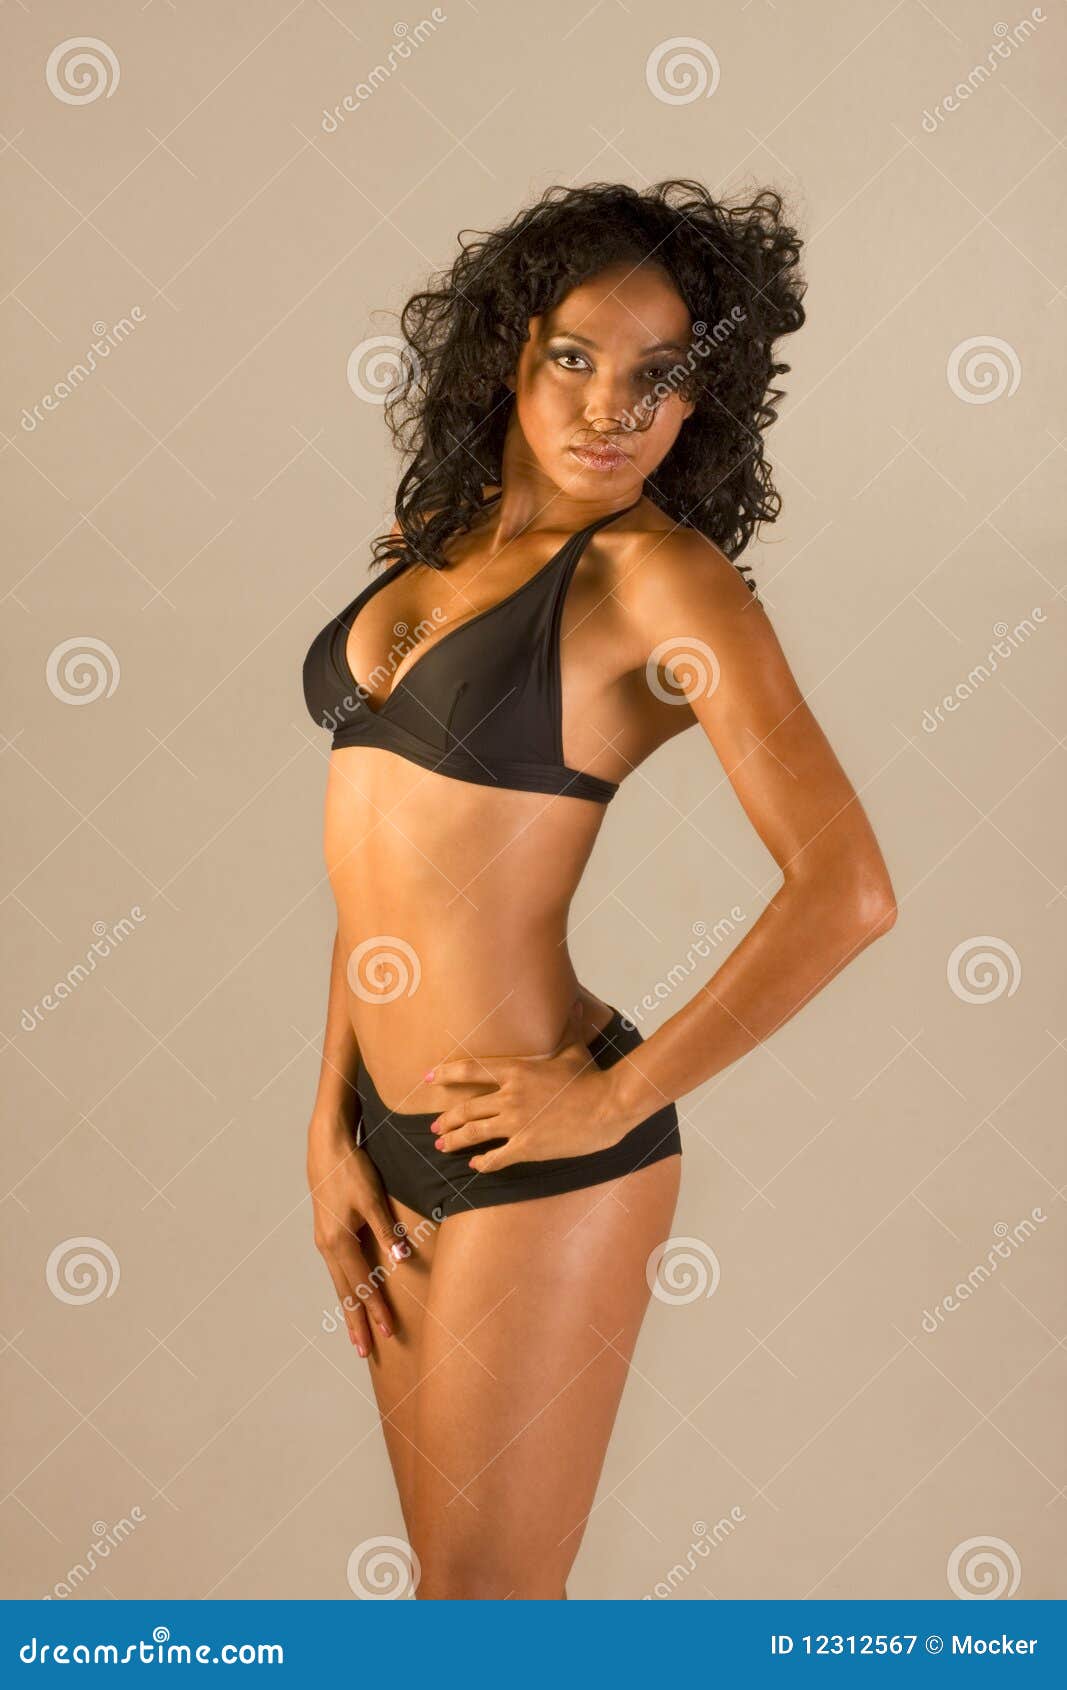 Sensual Middle Aged Ethnic Woman in Lingerie Stock Image